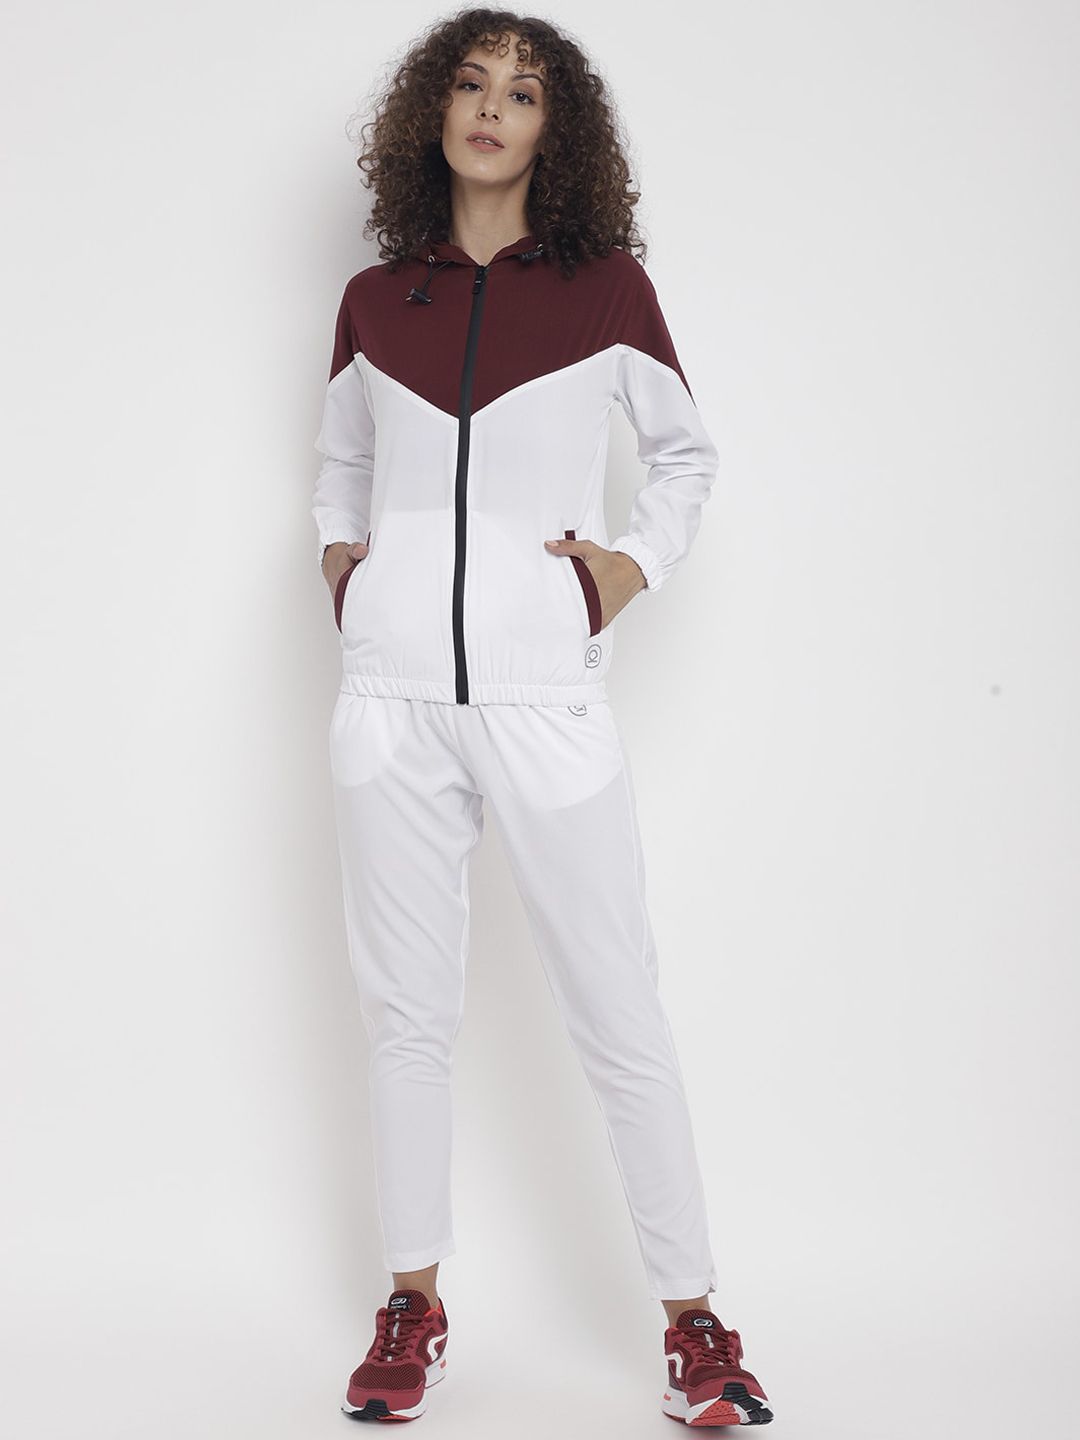 Chkokko Women Maroon & White Solid Track Suit Price in India